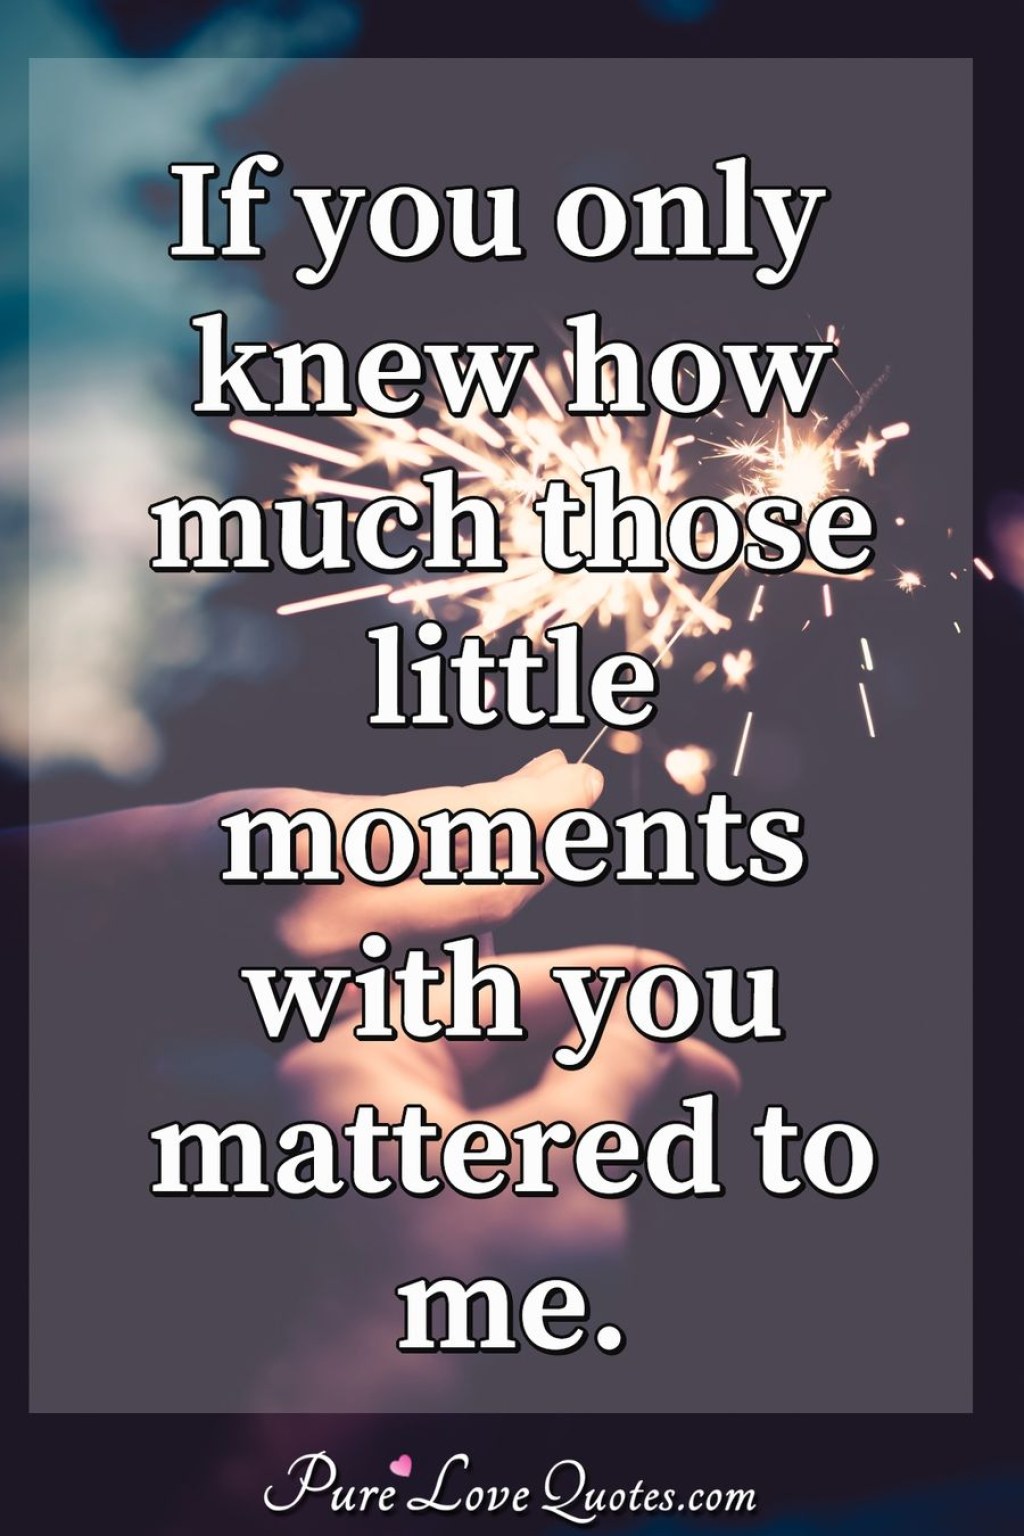 Picture of: If you only knew how much those little moments with you mattered